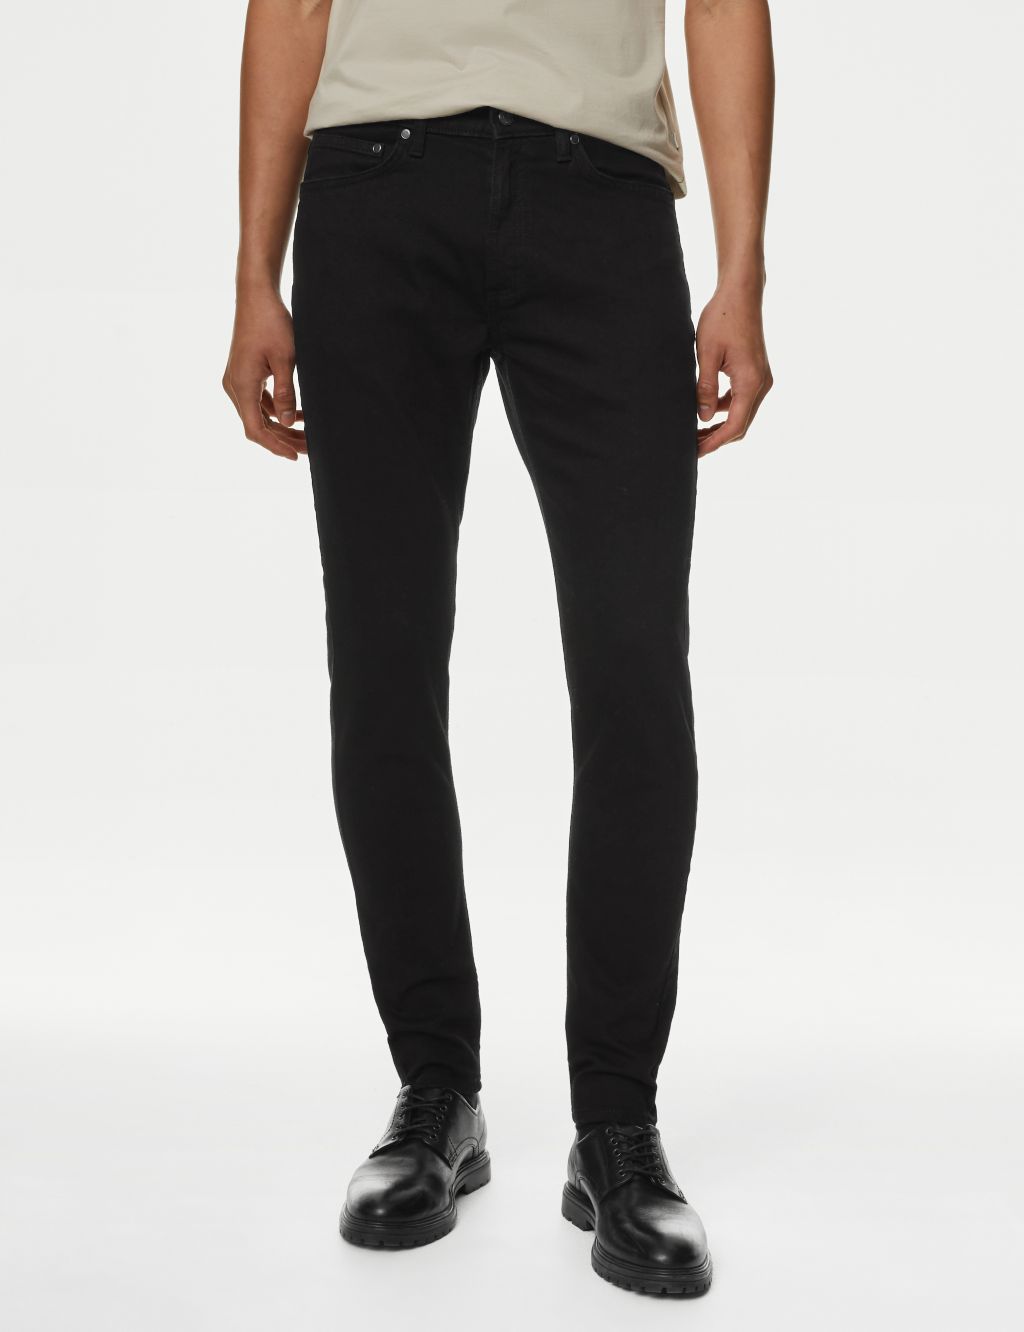 Skinny Fit Stretch Jeans image 1